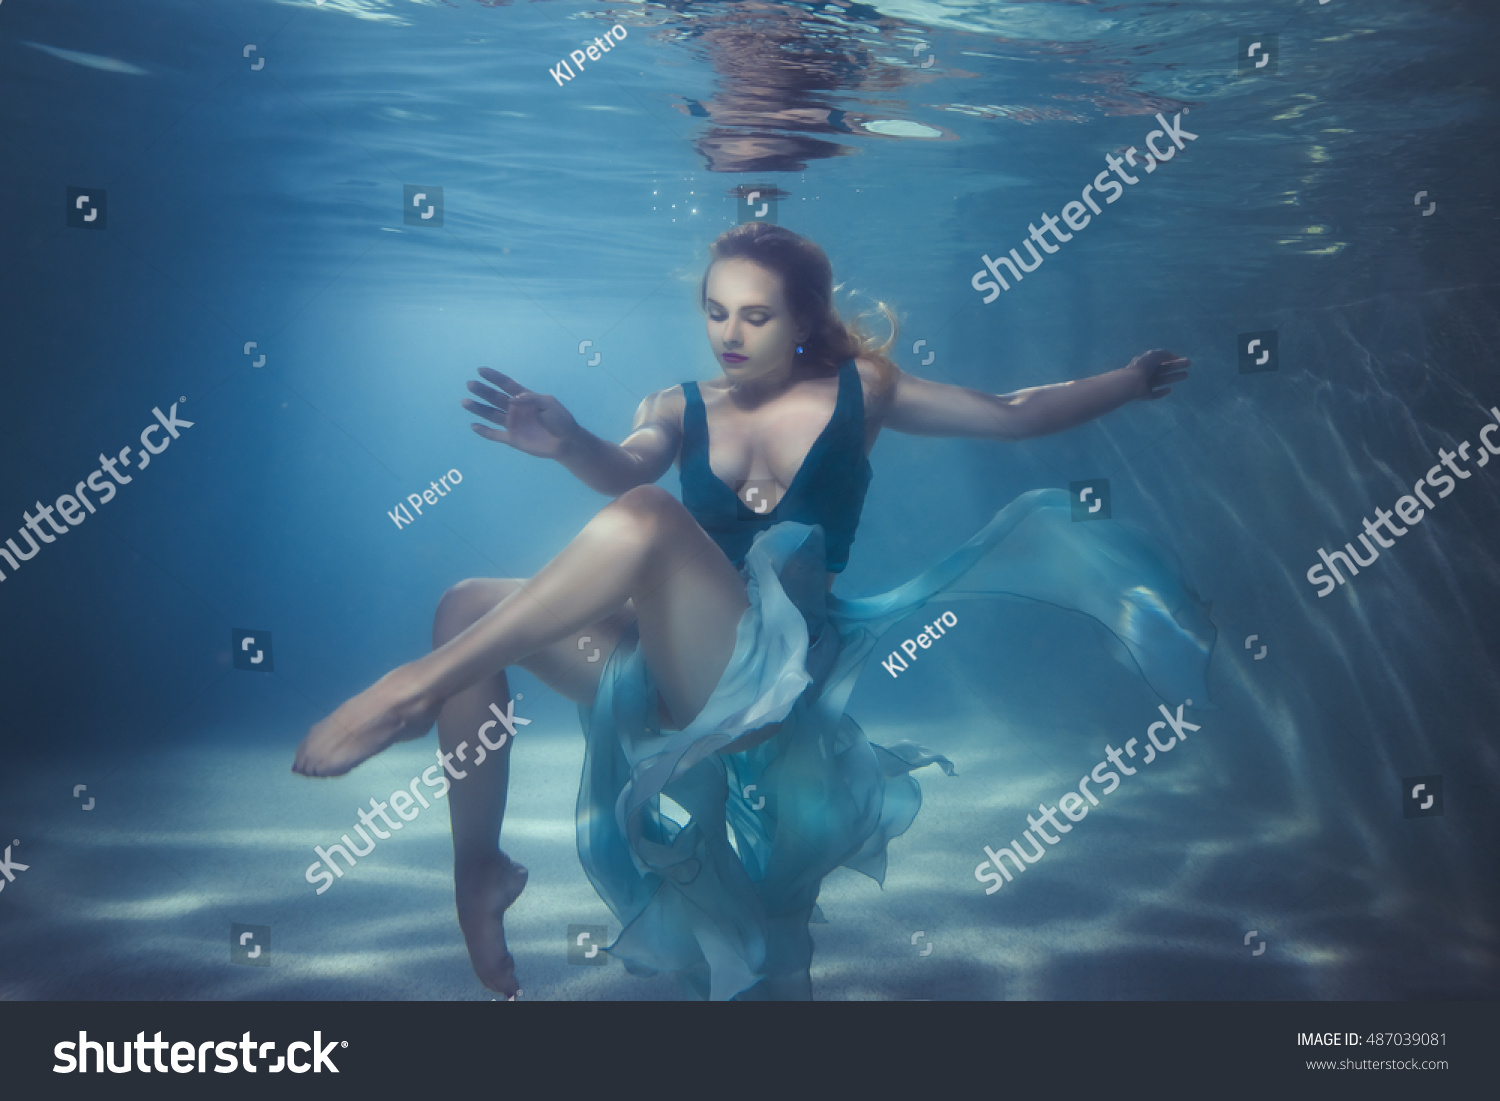 Woman in a dress dives underwater, she dances on the bottom. #487039081